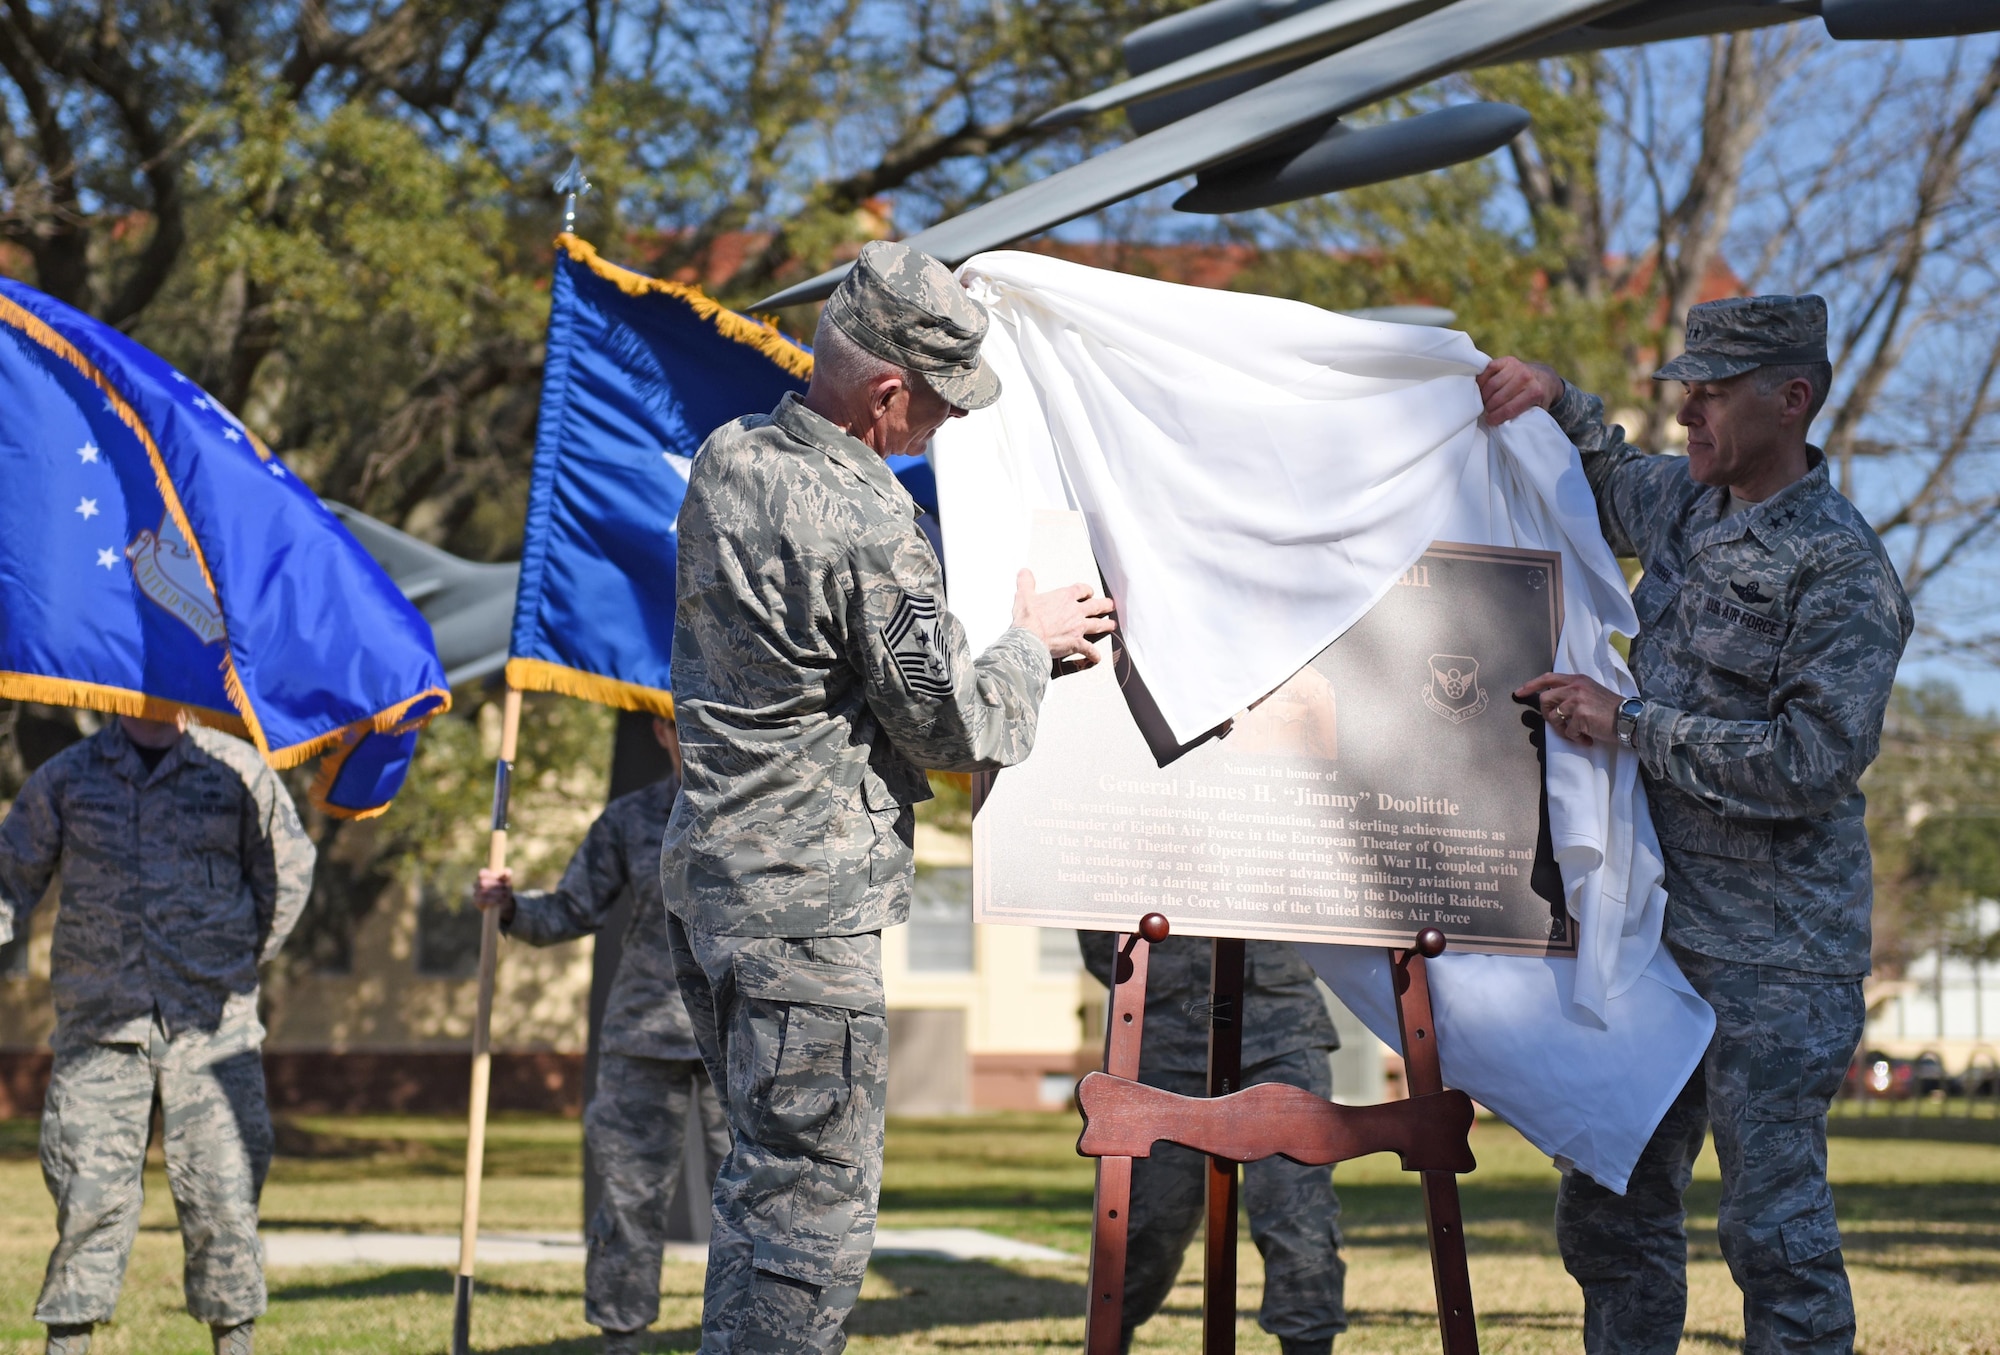 Chief Master Sgt. Alan Boling, 8th Air Force command chief, and Maj. Gen. Thomas Bussiere, 8th AF commander, unveil a plaque during a building dedication ceremony at Barksdale Air Force Base, La., Feb. 2, 2017. The 8th AF headquarters building was dedicated to General James H. “Jimmy” Doolittle during a series of 8th AF 75th diamond anniversary events. On Feb. 1, the Eighth celebrated its 75th anniversary, and former and current “Mighty Eighth” Airmen from across the country came to Barksdale AFB to take part in the celebration. (U.S. Air Force photo by Senior Airman Erin Trower)